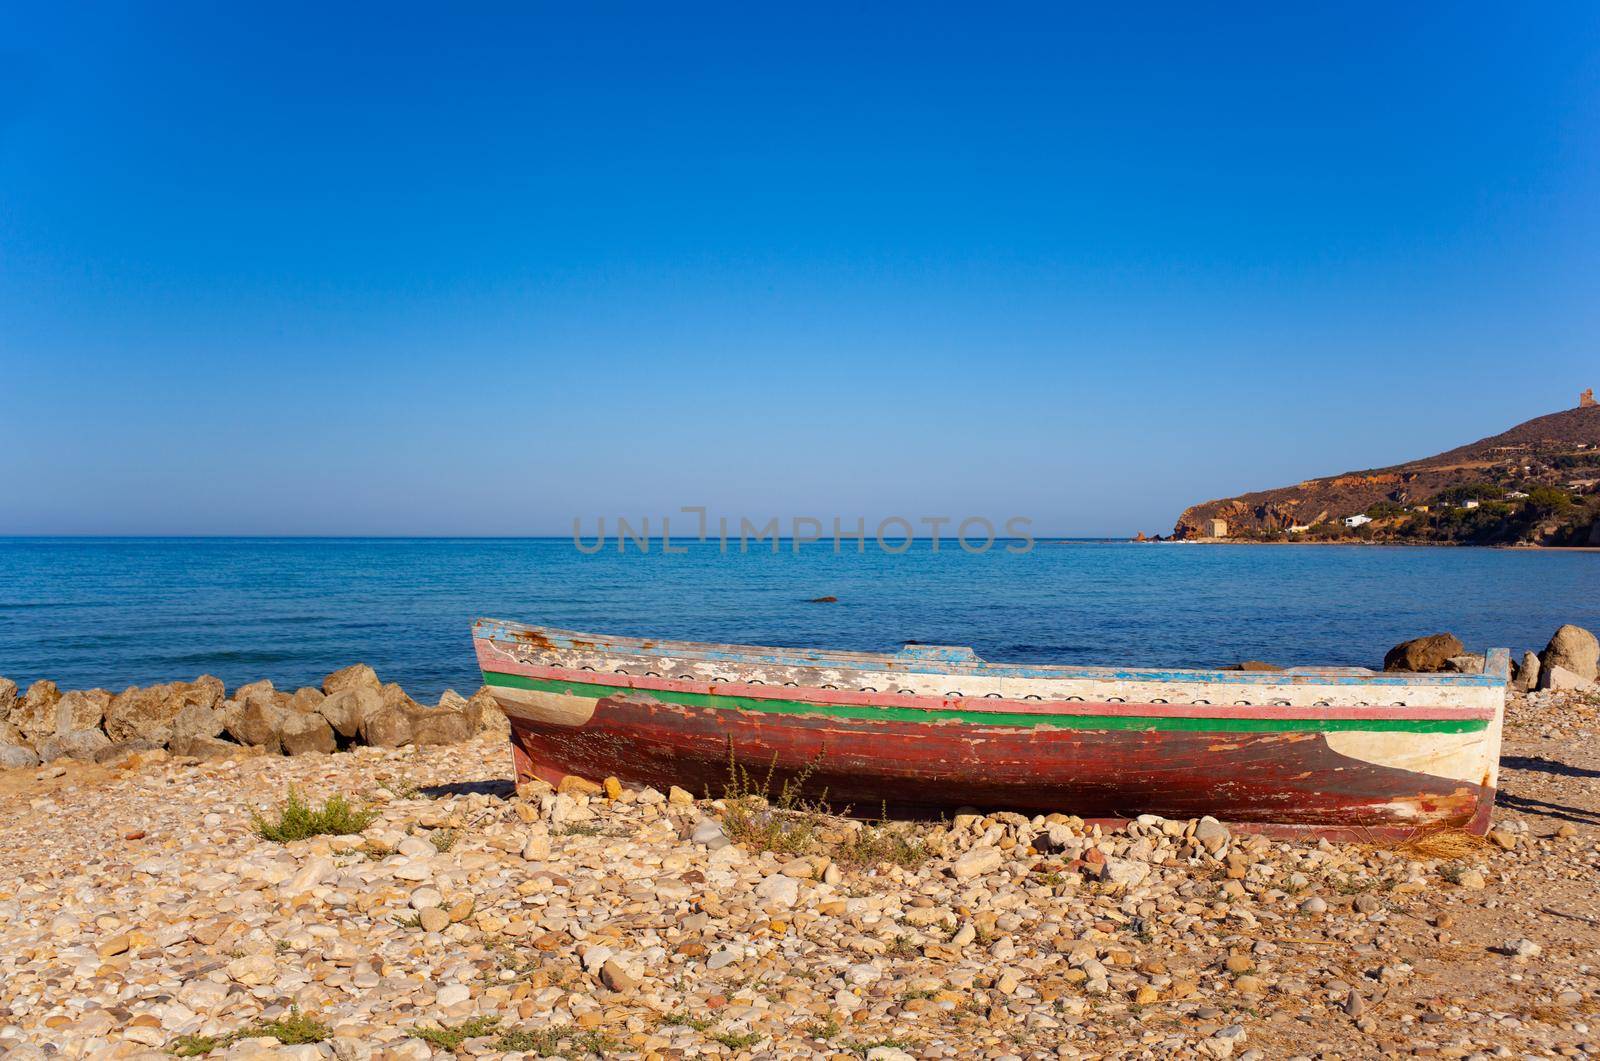 A Broken migrant boat stranded on the beach of the Agrigento coast